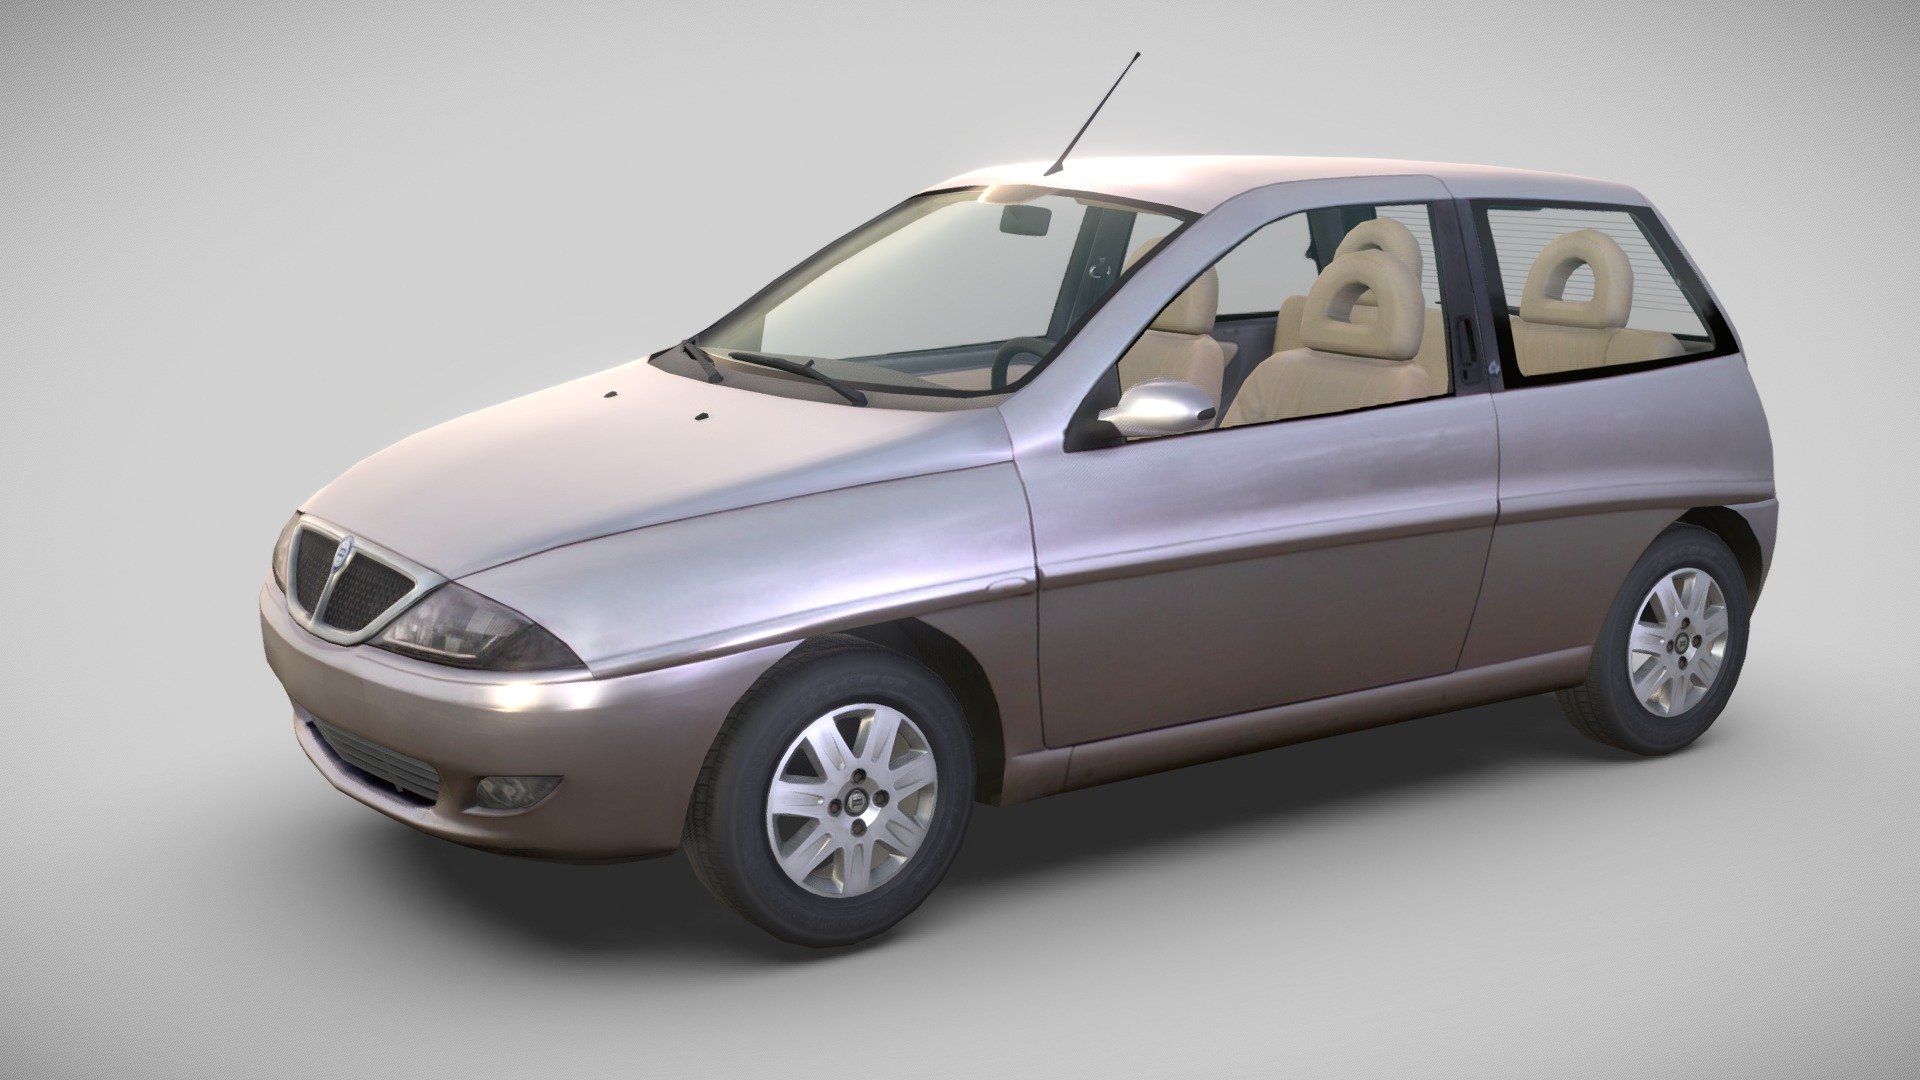 Lancia's little Y for Racer Free Car Simulation. Built from scratch with Blender/ textured with Zmodeler, 2014 3d model